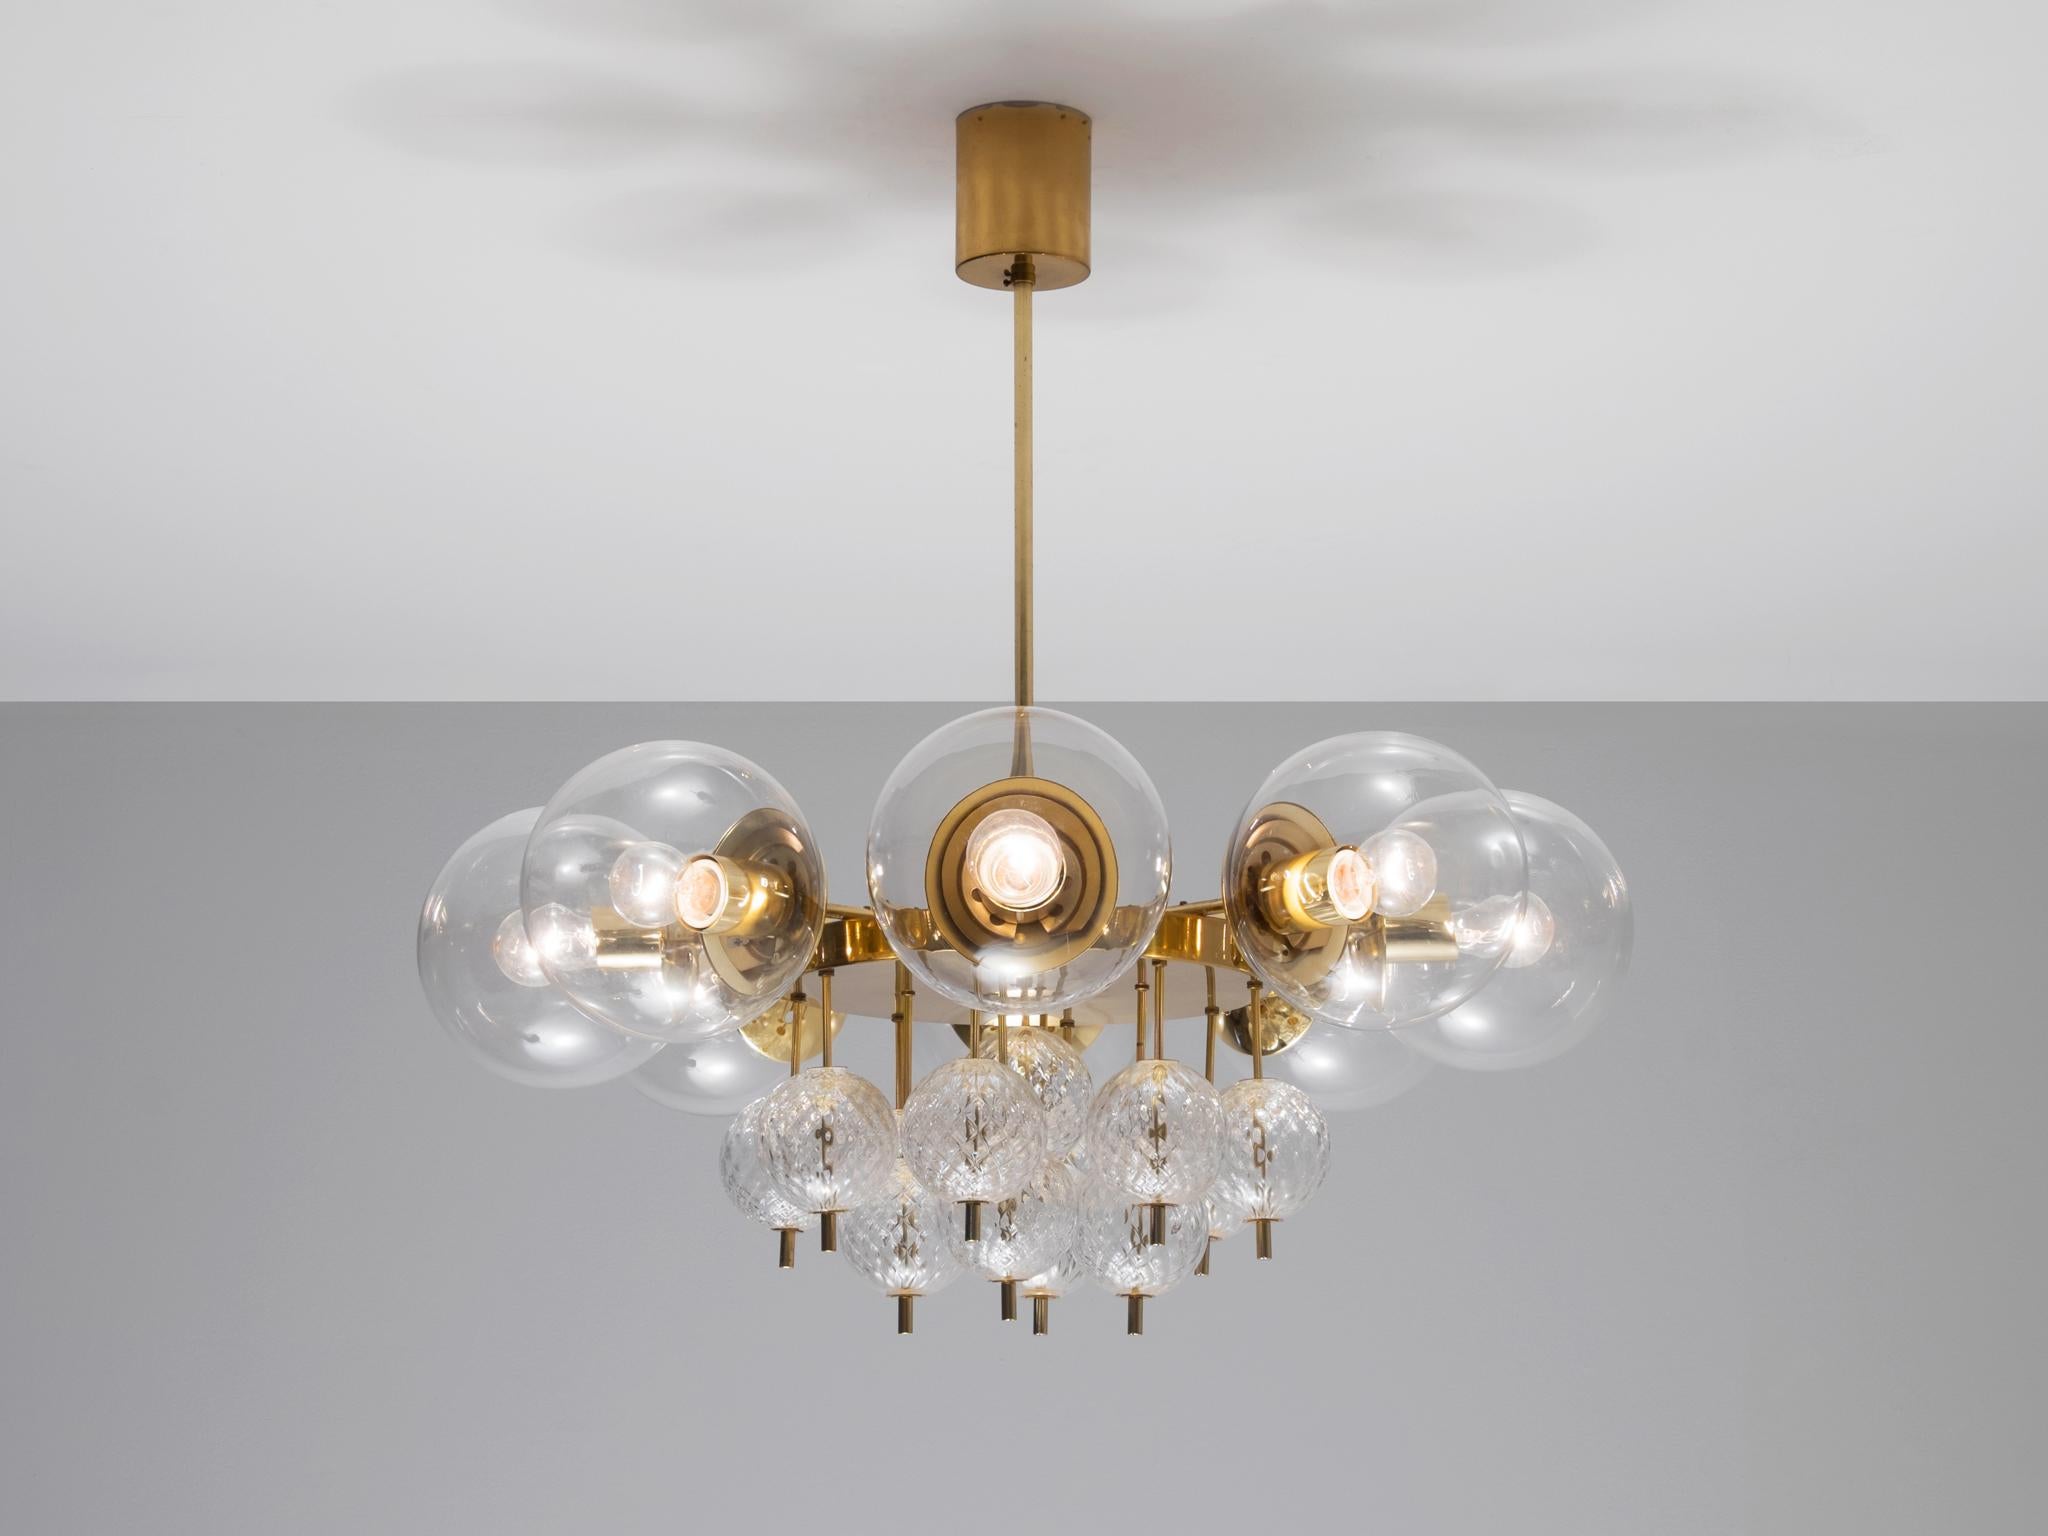 Large brass chandelier with beautiful glass bulbs, 1960s. 

This lights were found in the very south of the Czech Republic, so most likely from Austrian production seen their excellent quality with which they have been manufactured. Eight large